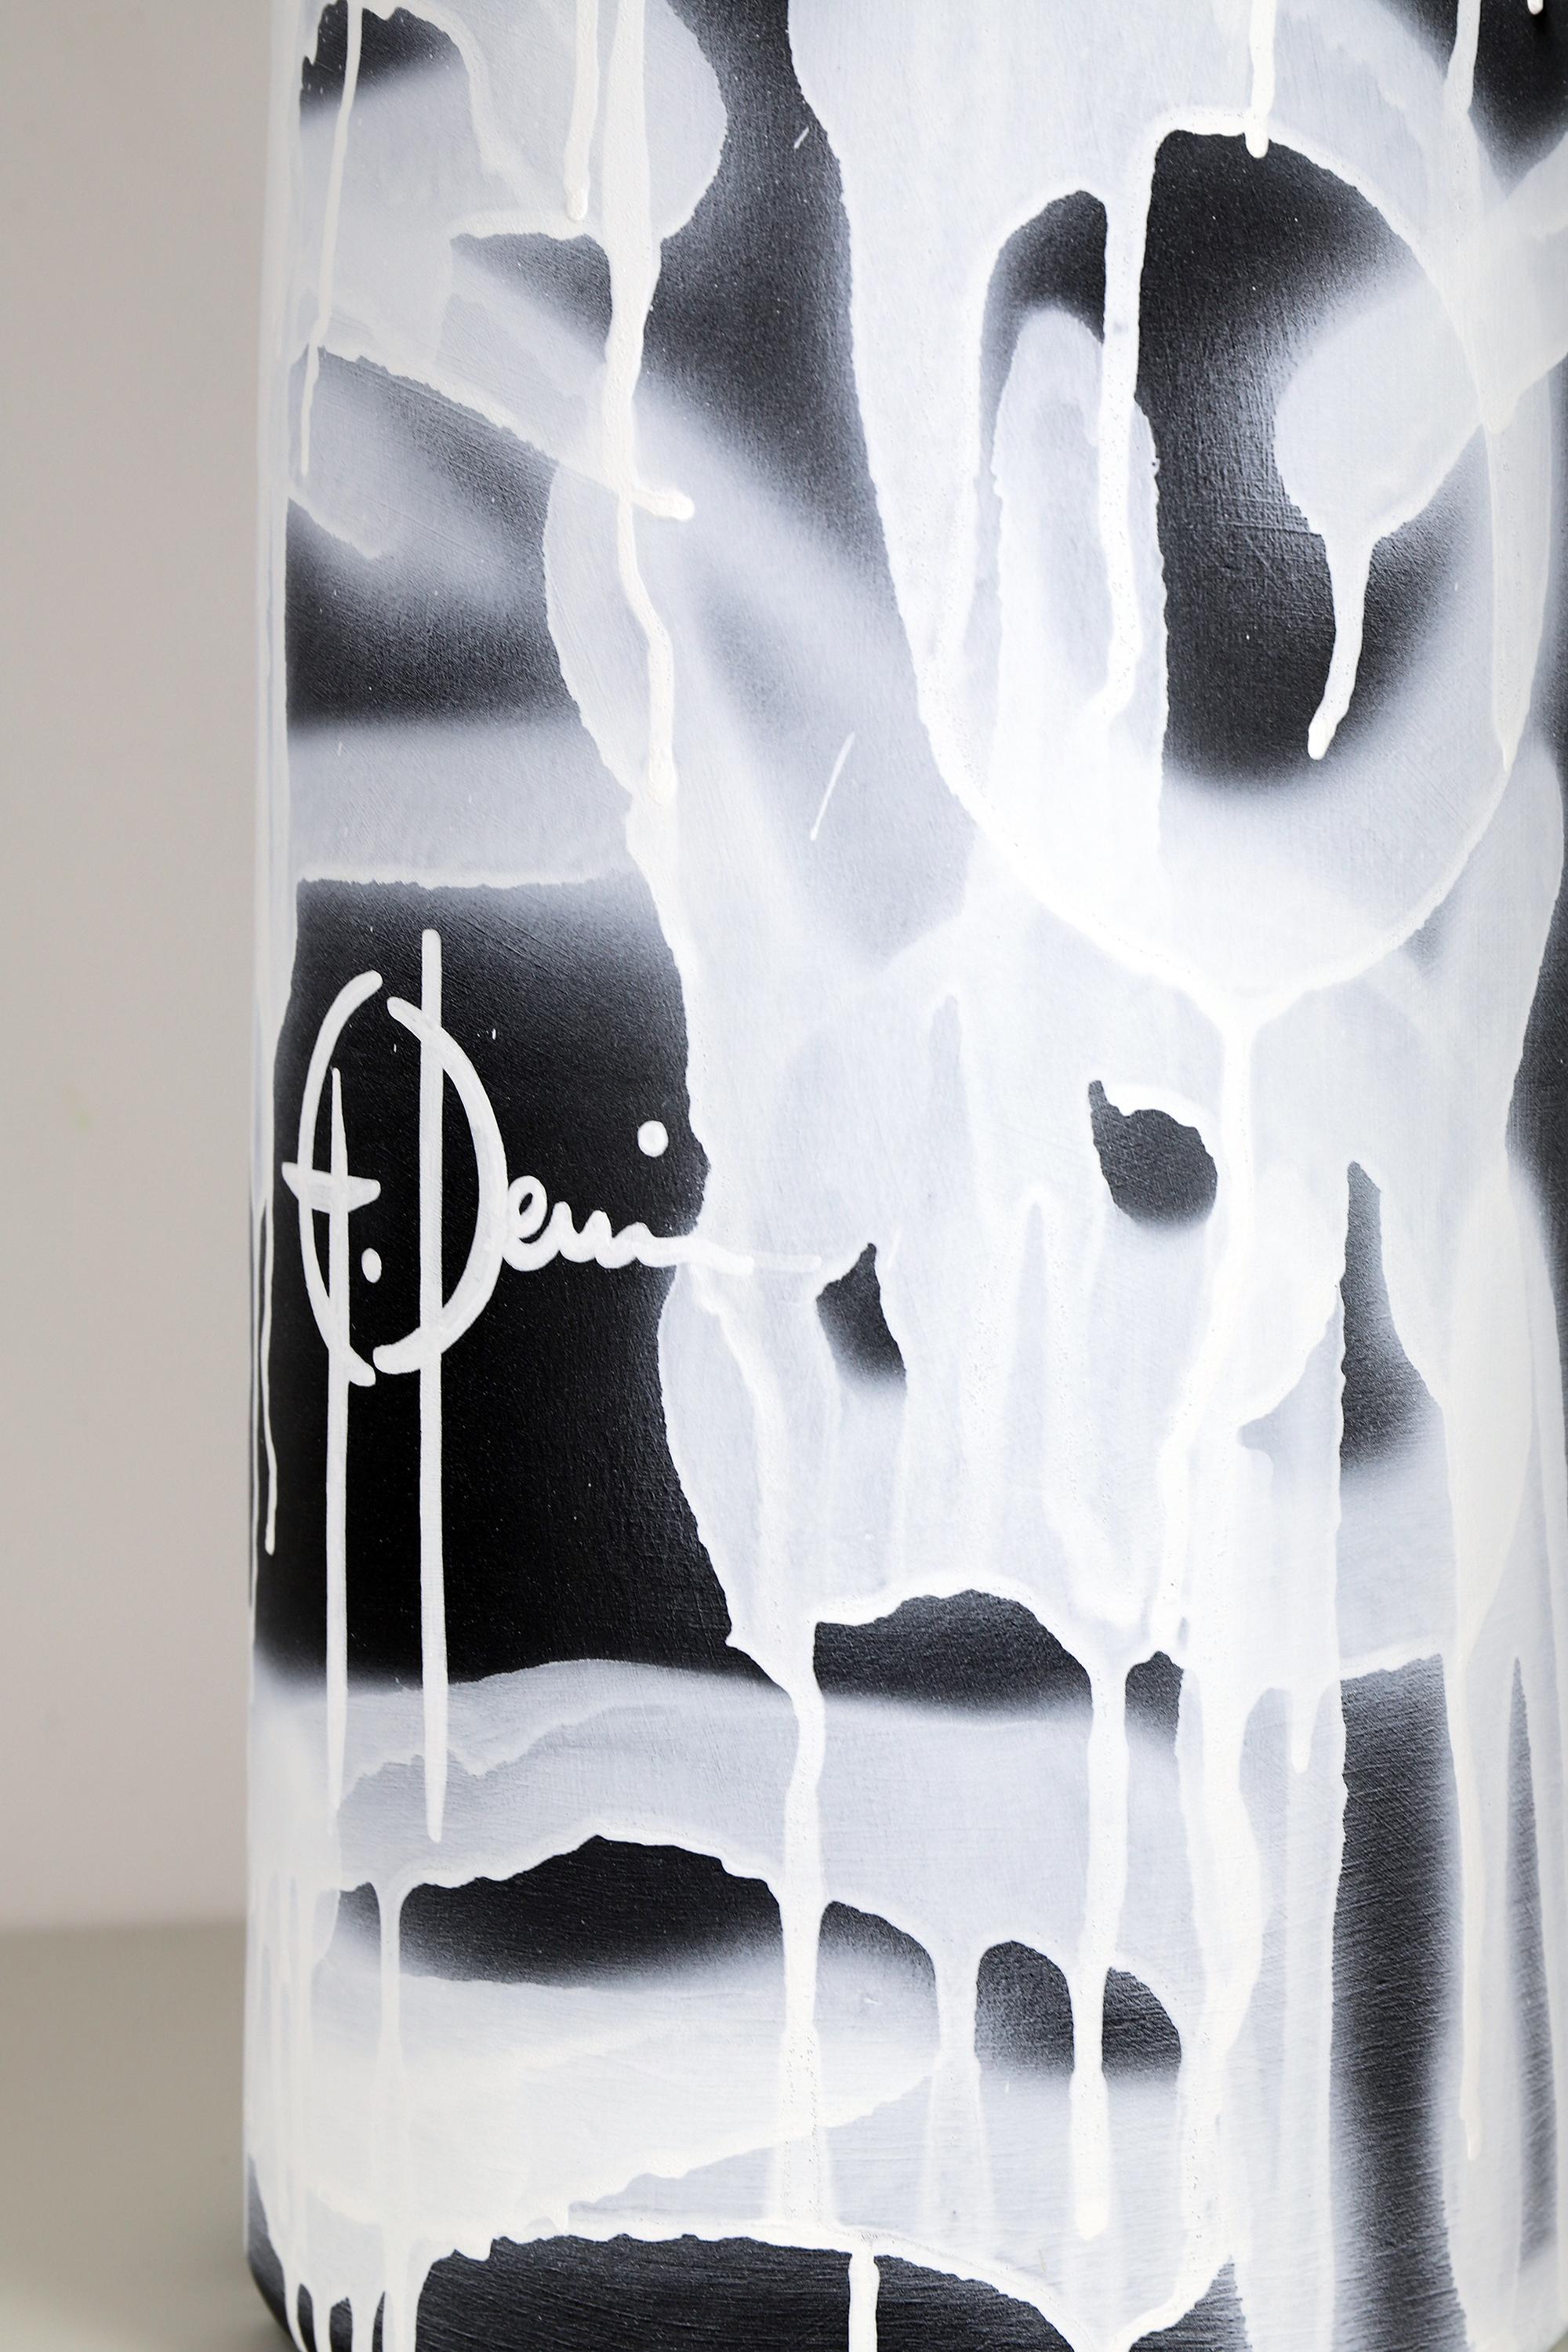 'Spectrum Nebula' Acrylic and Spray Painted Ceramic Vase - Gray Abstract Sculpture by Grégoire Devin